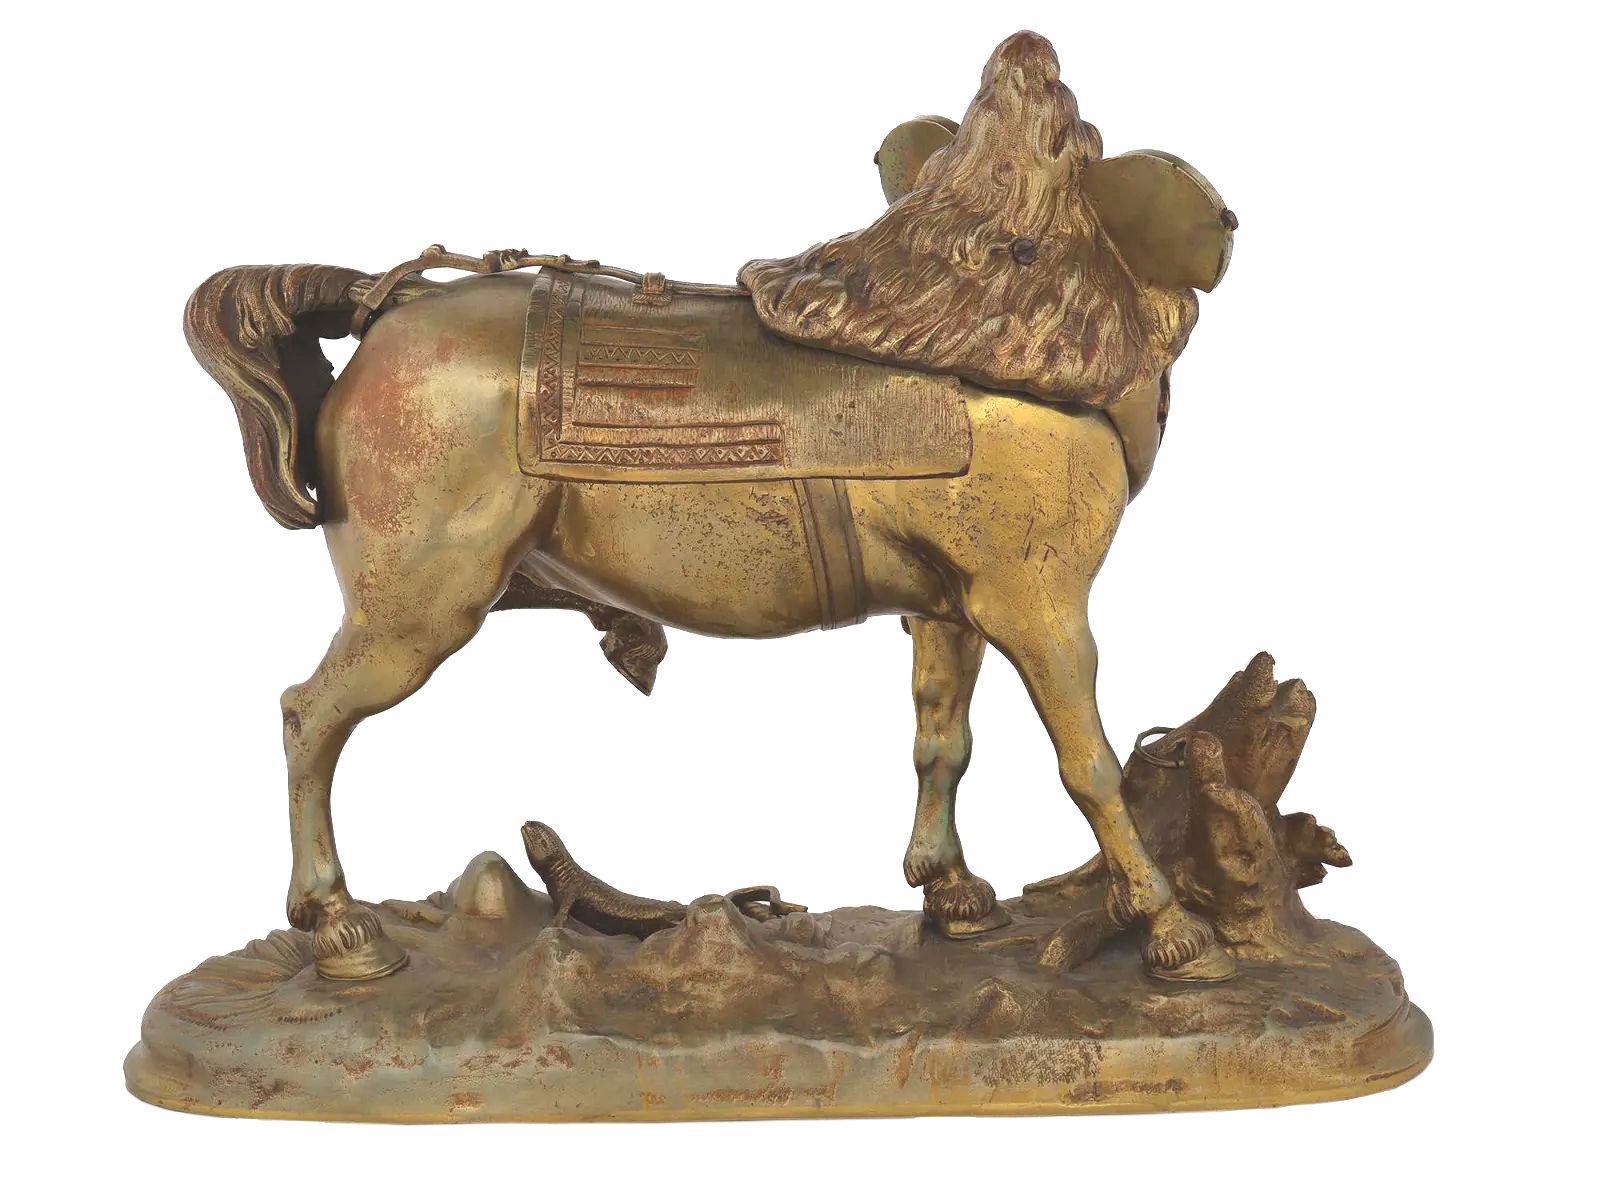 Our charming bronze depicting a horse startled by a lizard after the French artist, Jean-Francois-Theodore Gechter (1796-1844) measures 11.25 in (28.5 cm) tall. Apparently unsigned.

The artist studied with François Joseph Bosio and debuted his